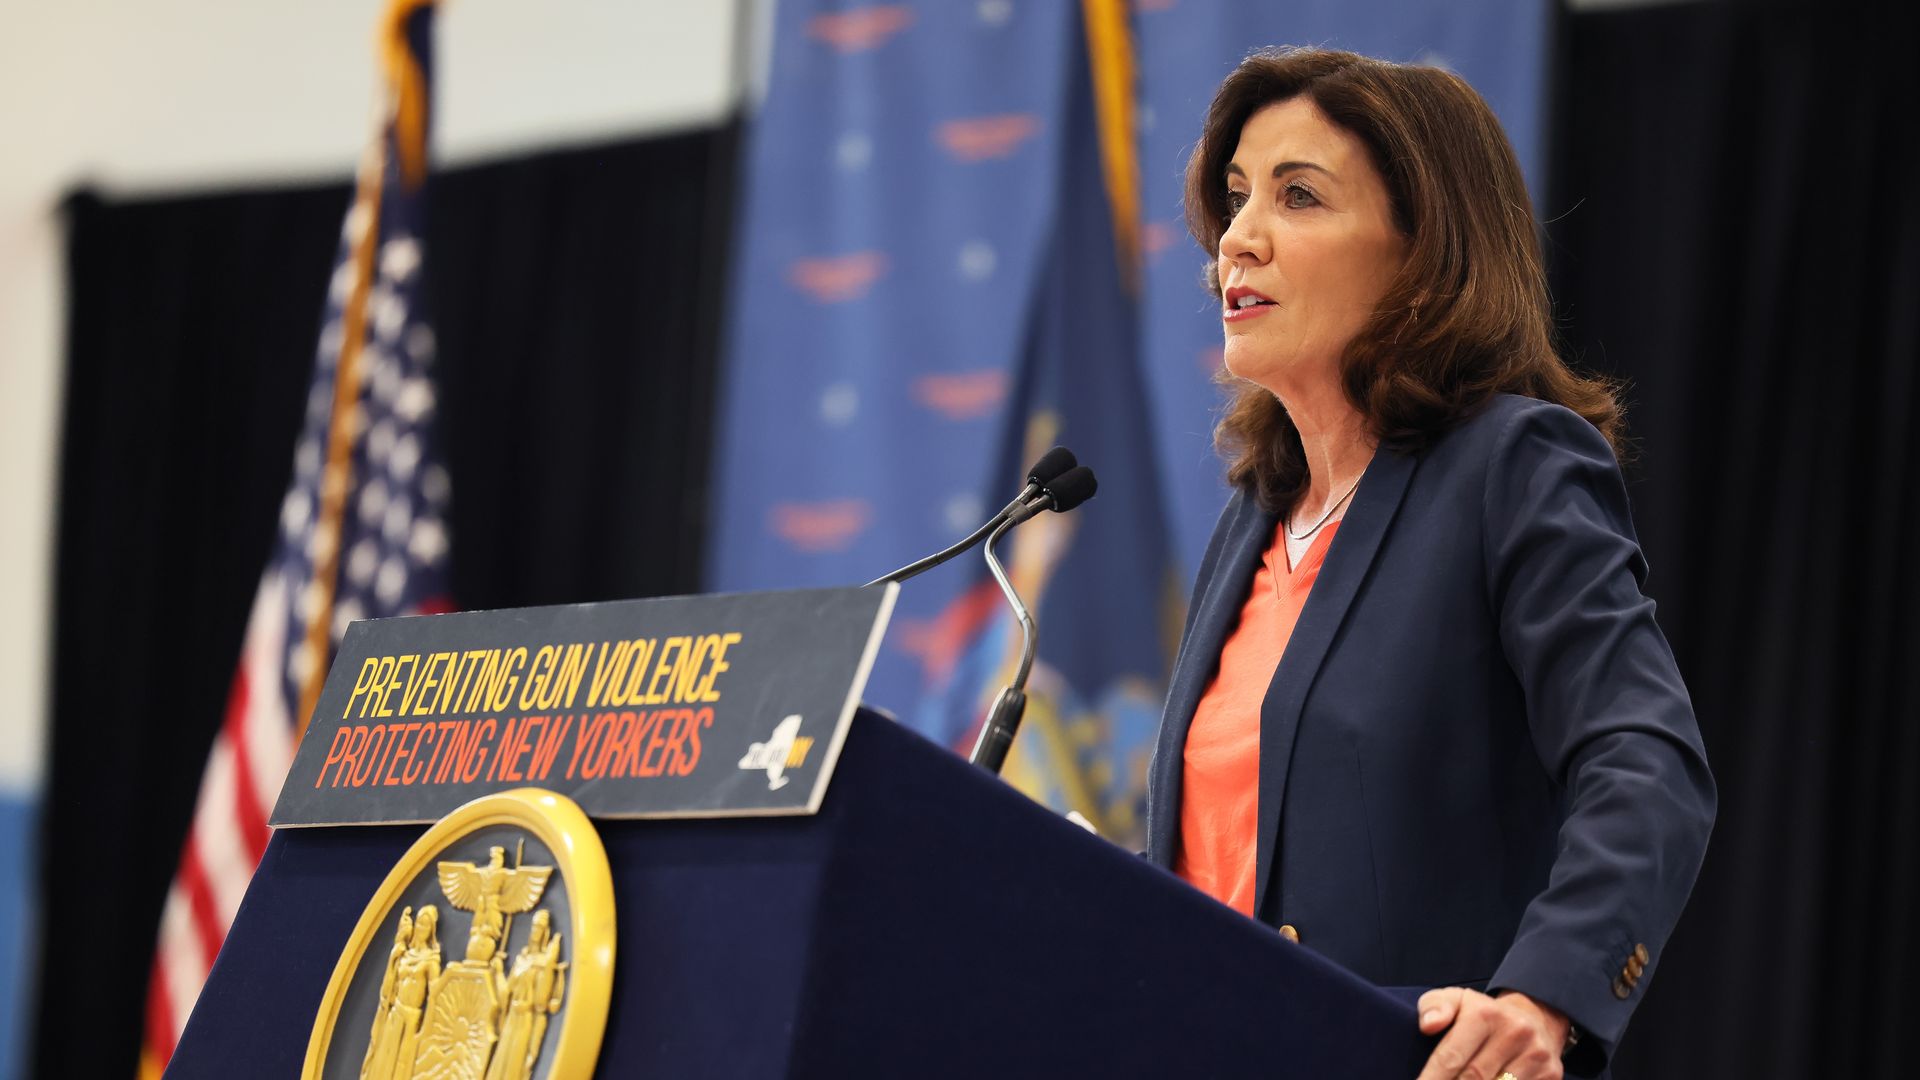 Photo of Kathy Hochul speaking from a podium